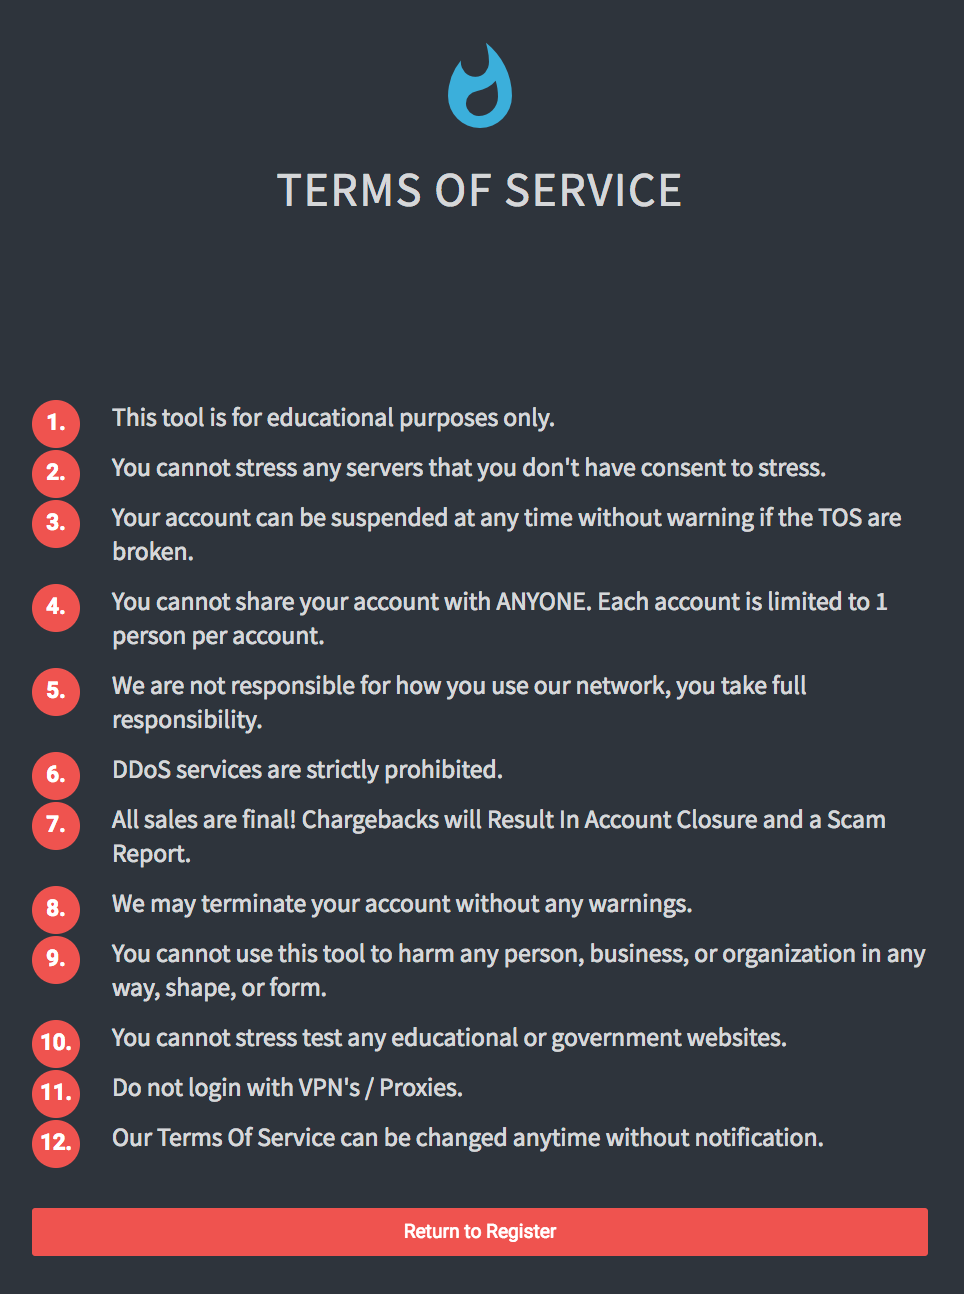 Terms of service for Defcon.pro